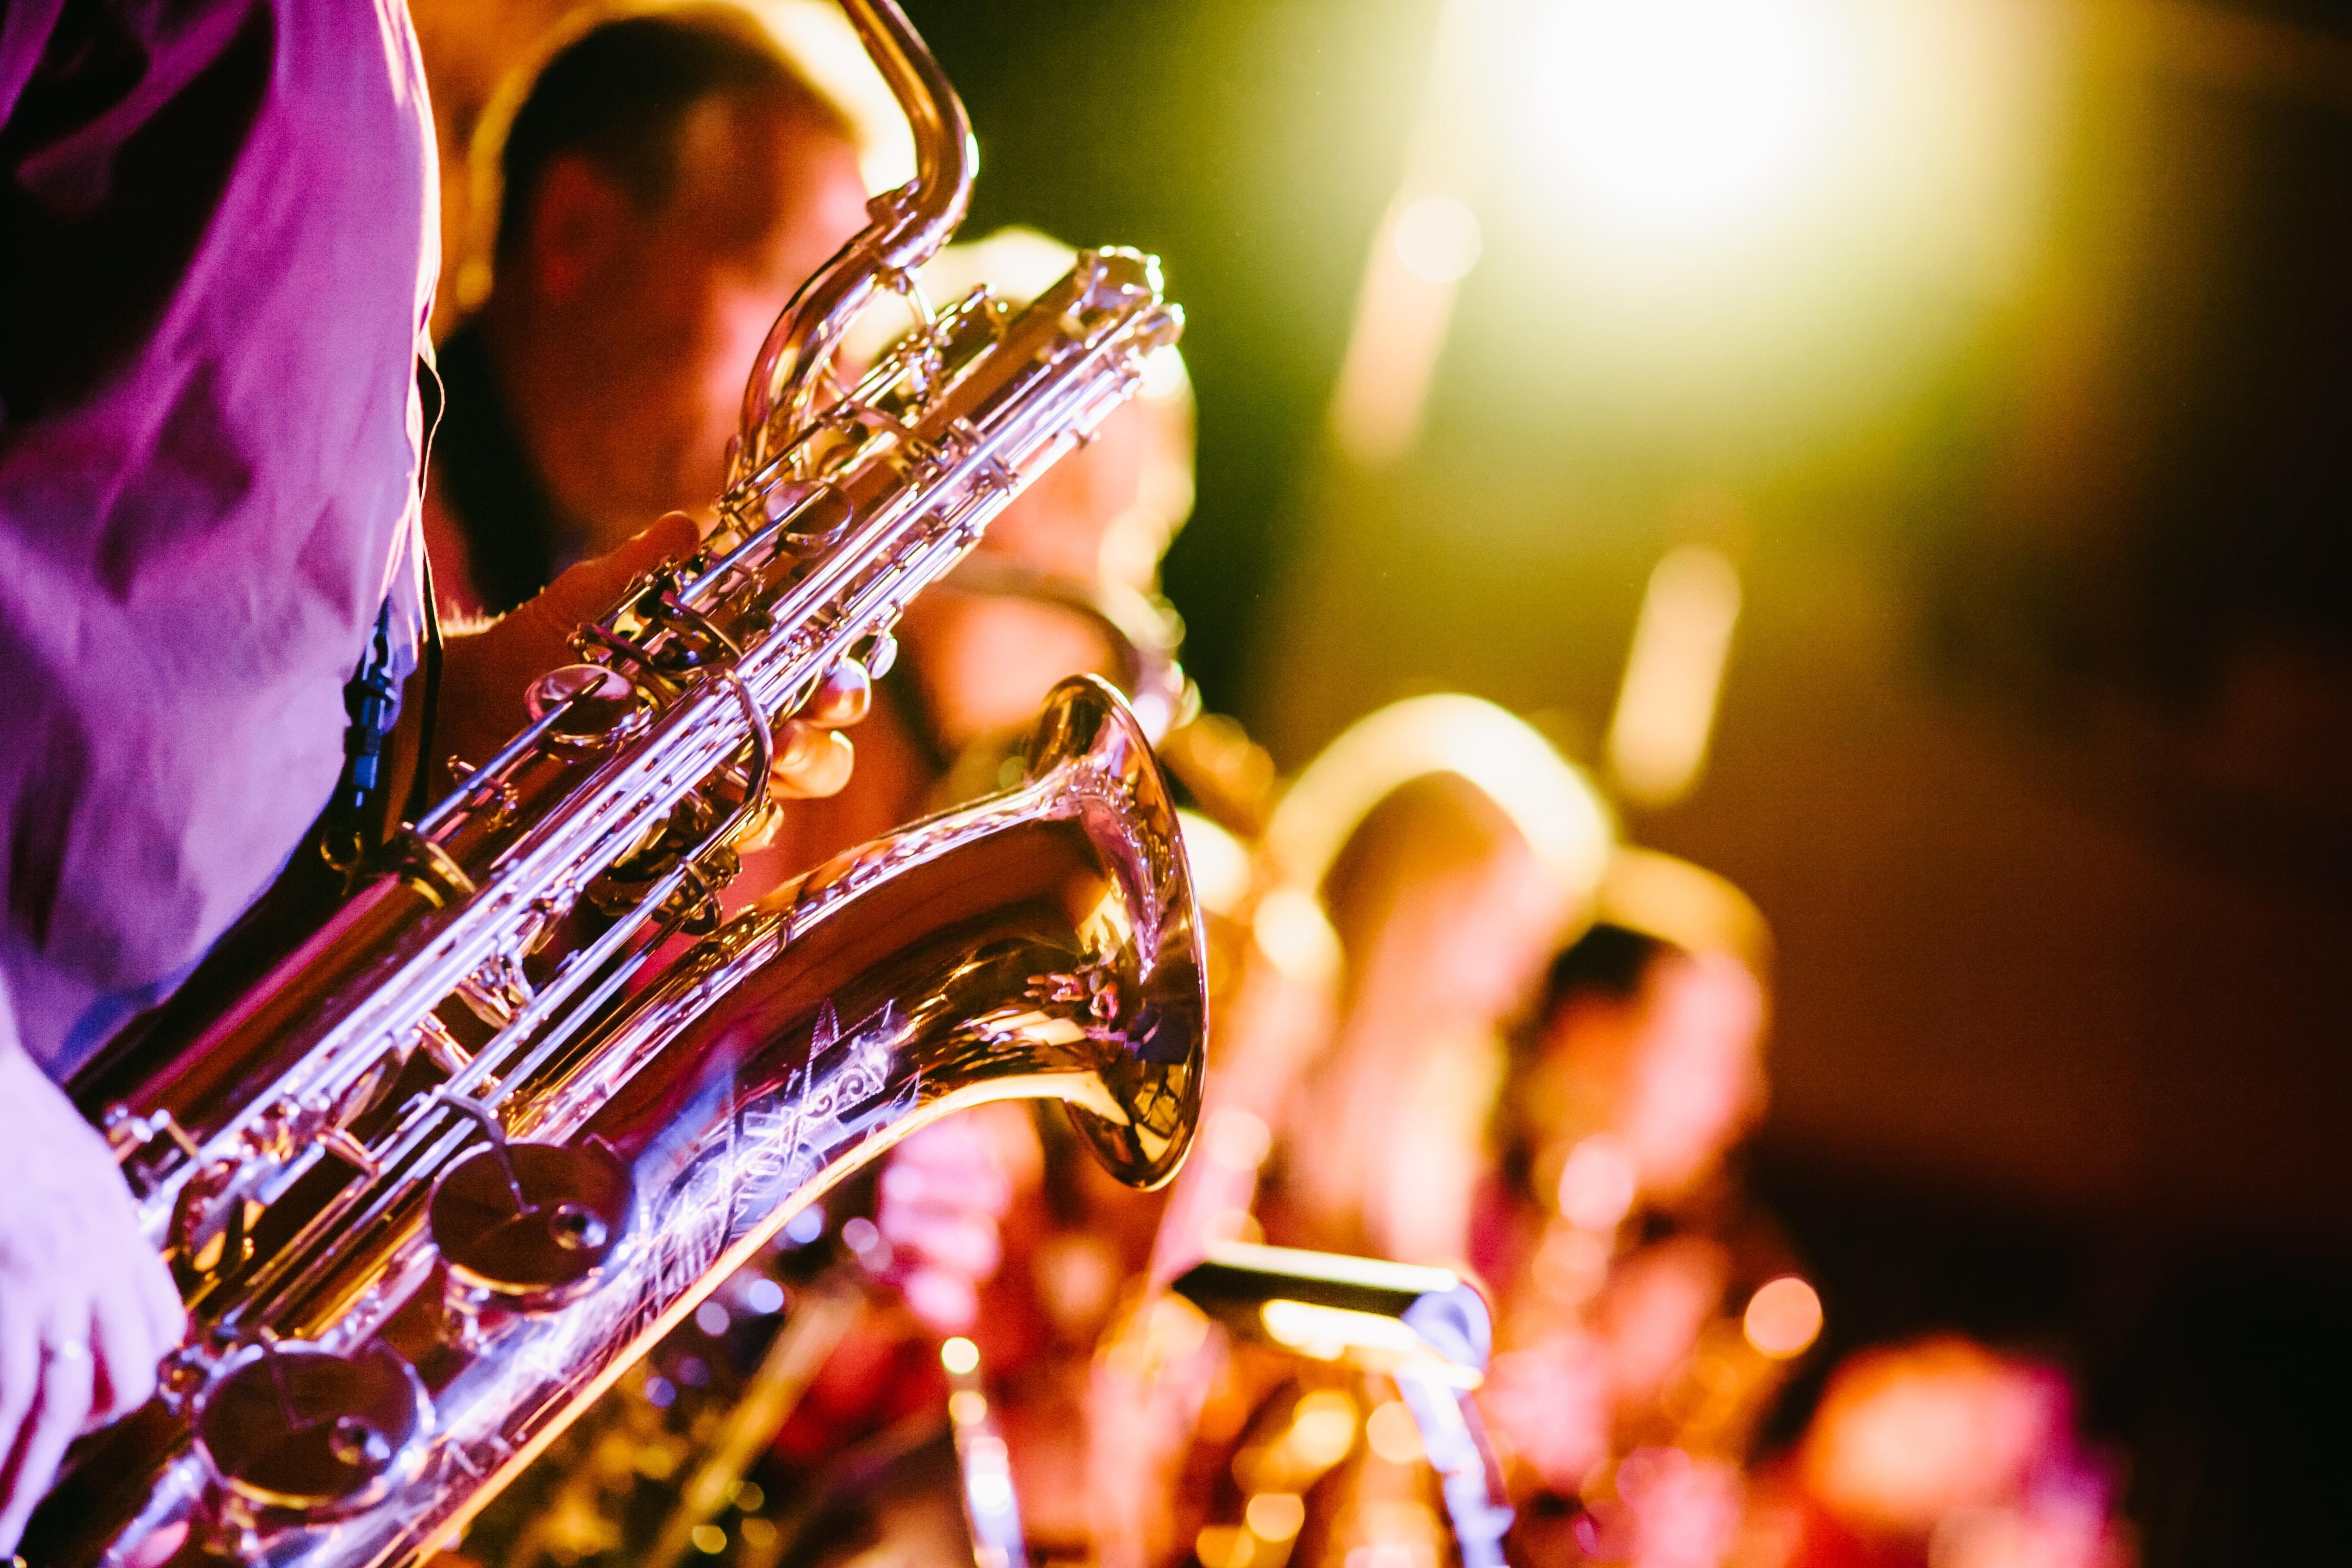 Colorful closeup on musicians playing brass instruments with a saxophone in focus